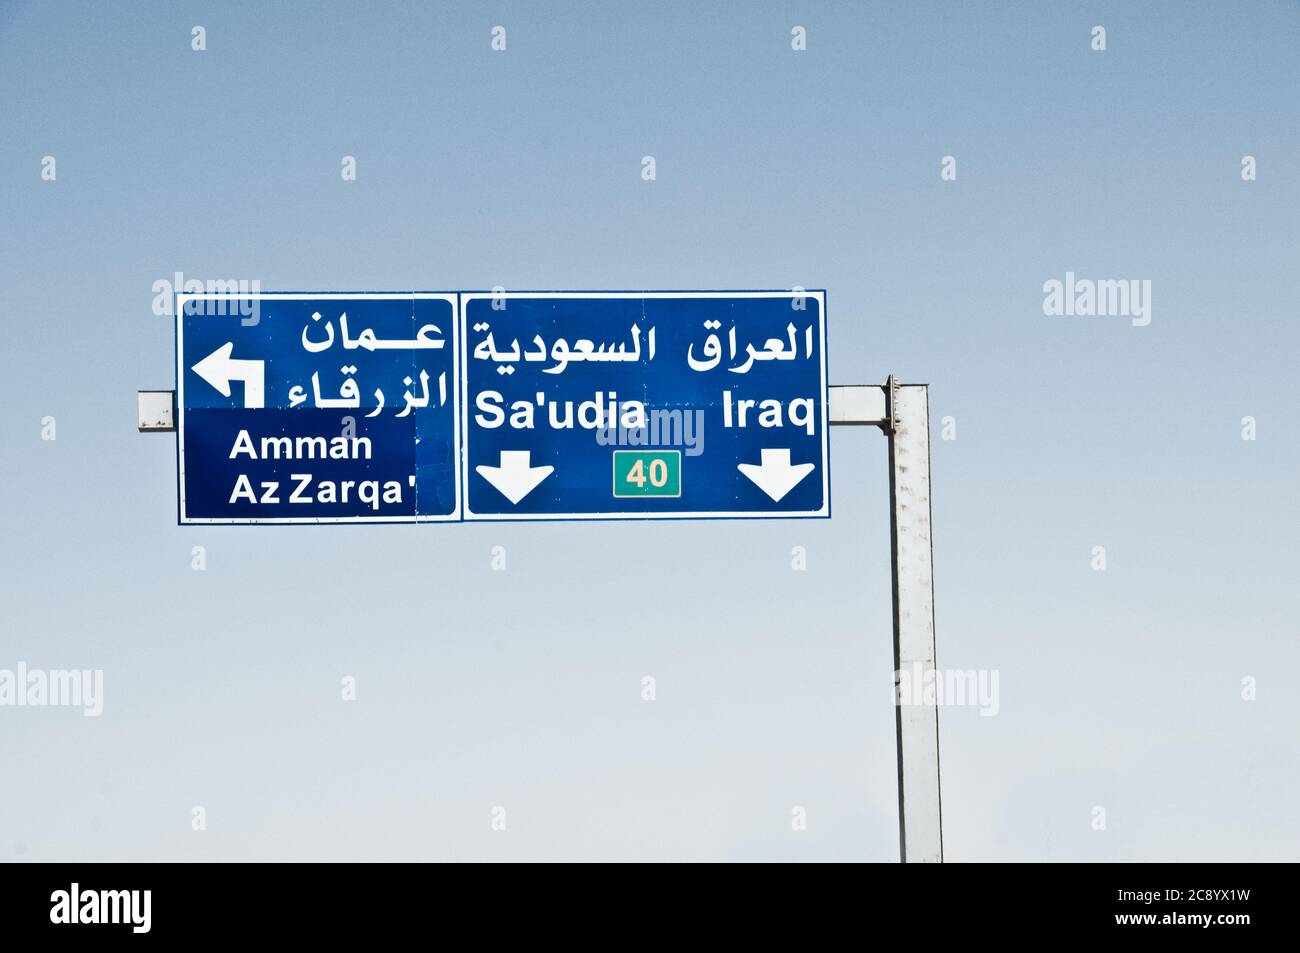 A highway sign on the outskirts of Amman, indicating the directions of the capital, Zarqa, Saudi Arabia and Iraq, in the Hashemite Kingdom of Jordan. Stock Photo